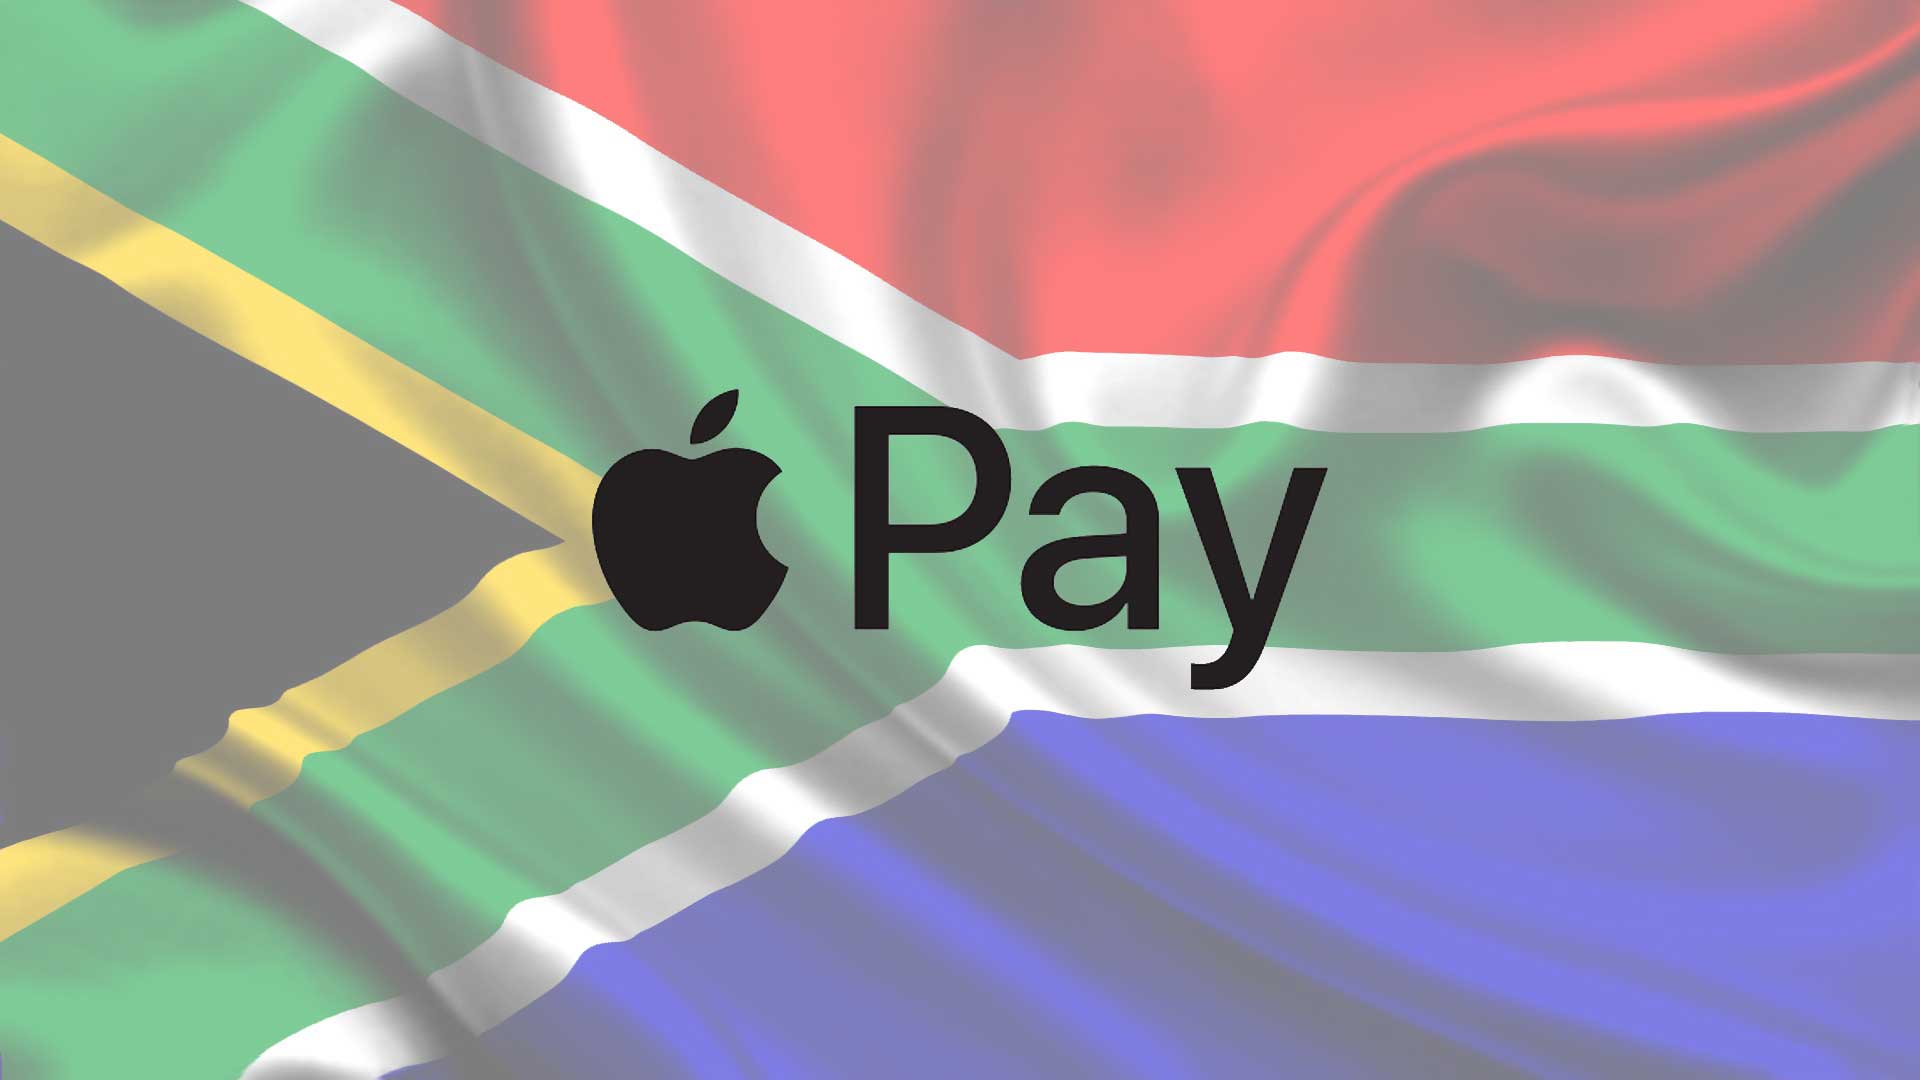 Apple Pay Now Live in South Africa – Which Banks Support it?